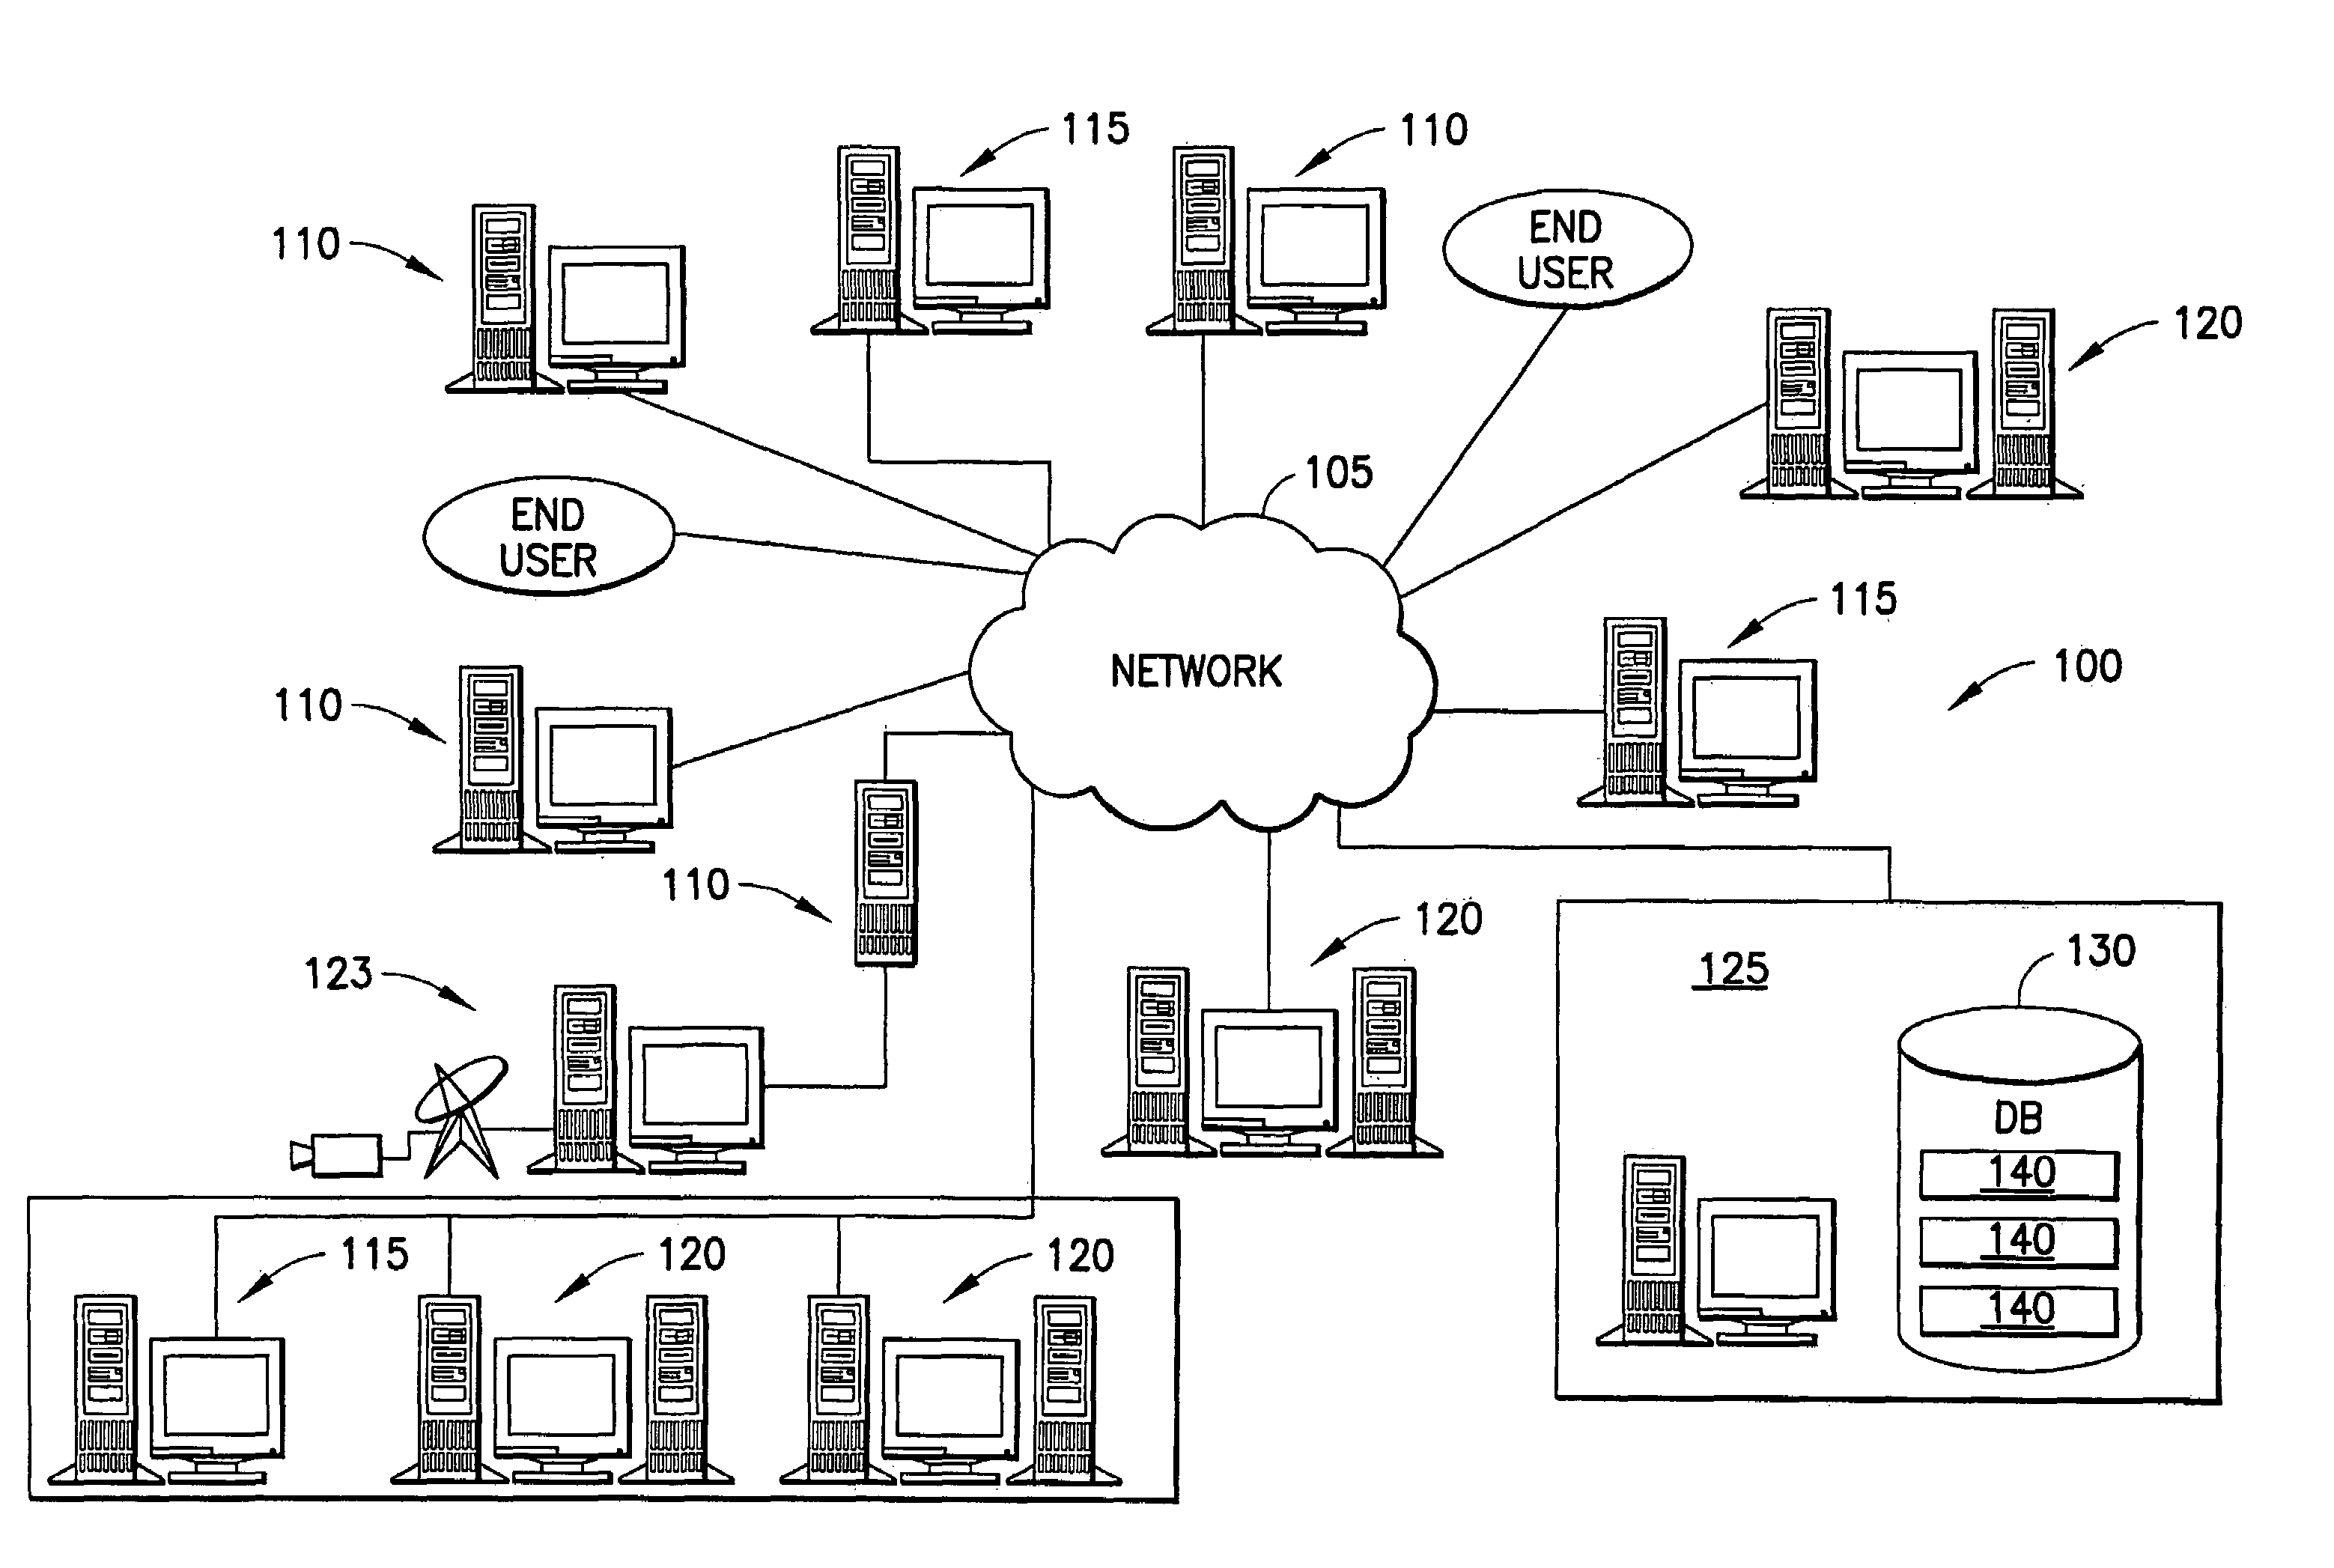 System and method for monitoring delivery of digital content, including streaming media